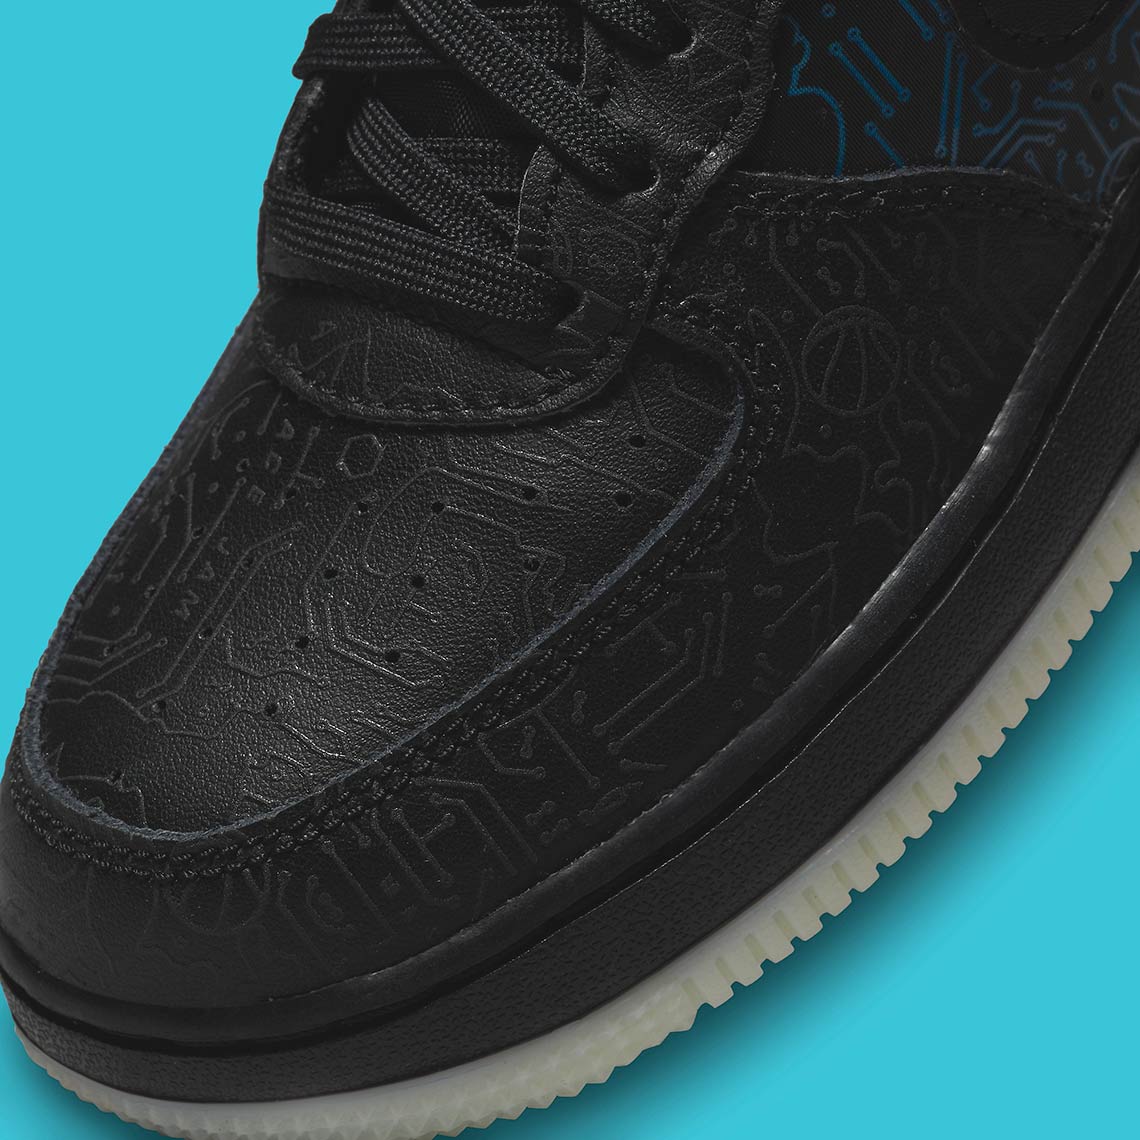 Space Jam Nike Air Force 1 Black GS PS TD Release Info | SneakerNews.com